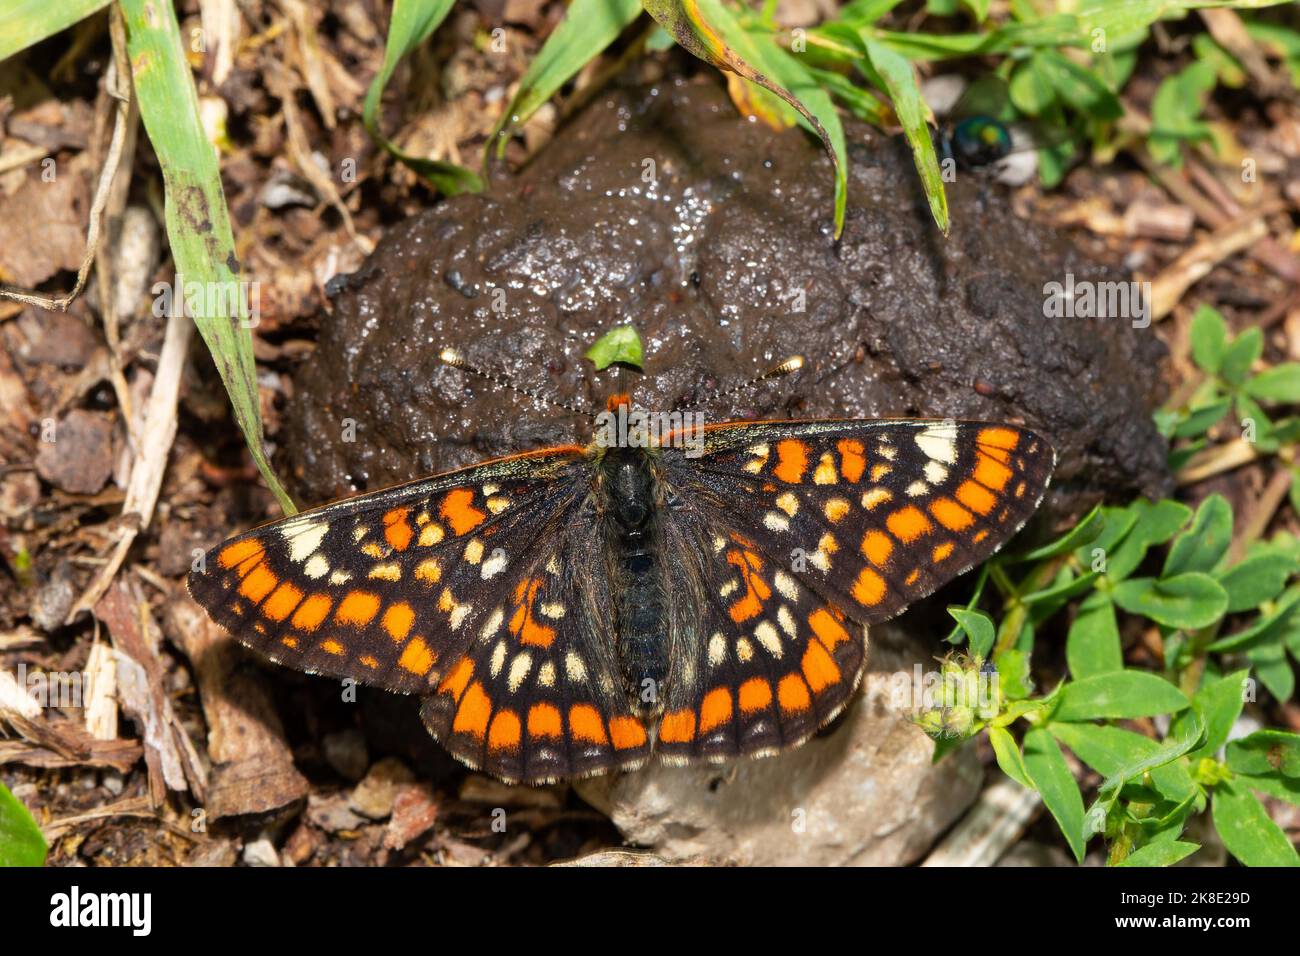 May bird, Ash fritillary butterfly Butterfly with open wings sitting on dung from behind Stock Photo